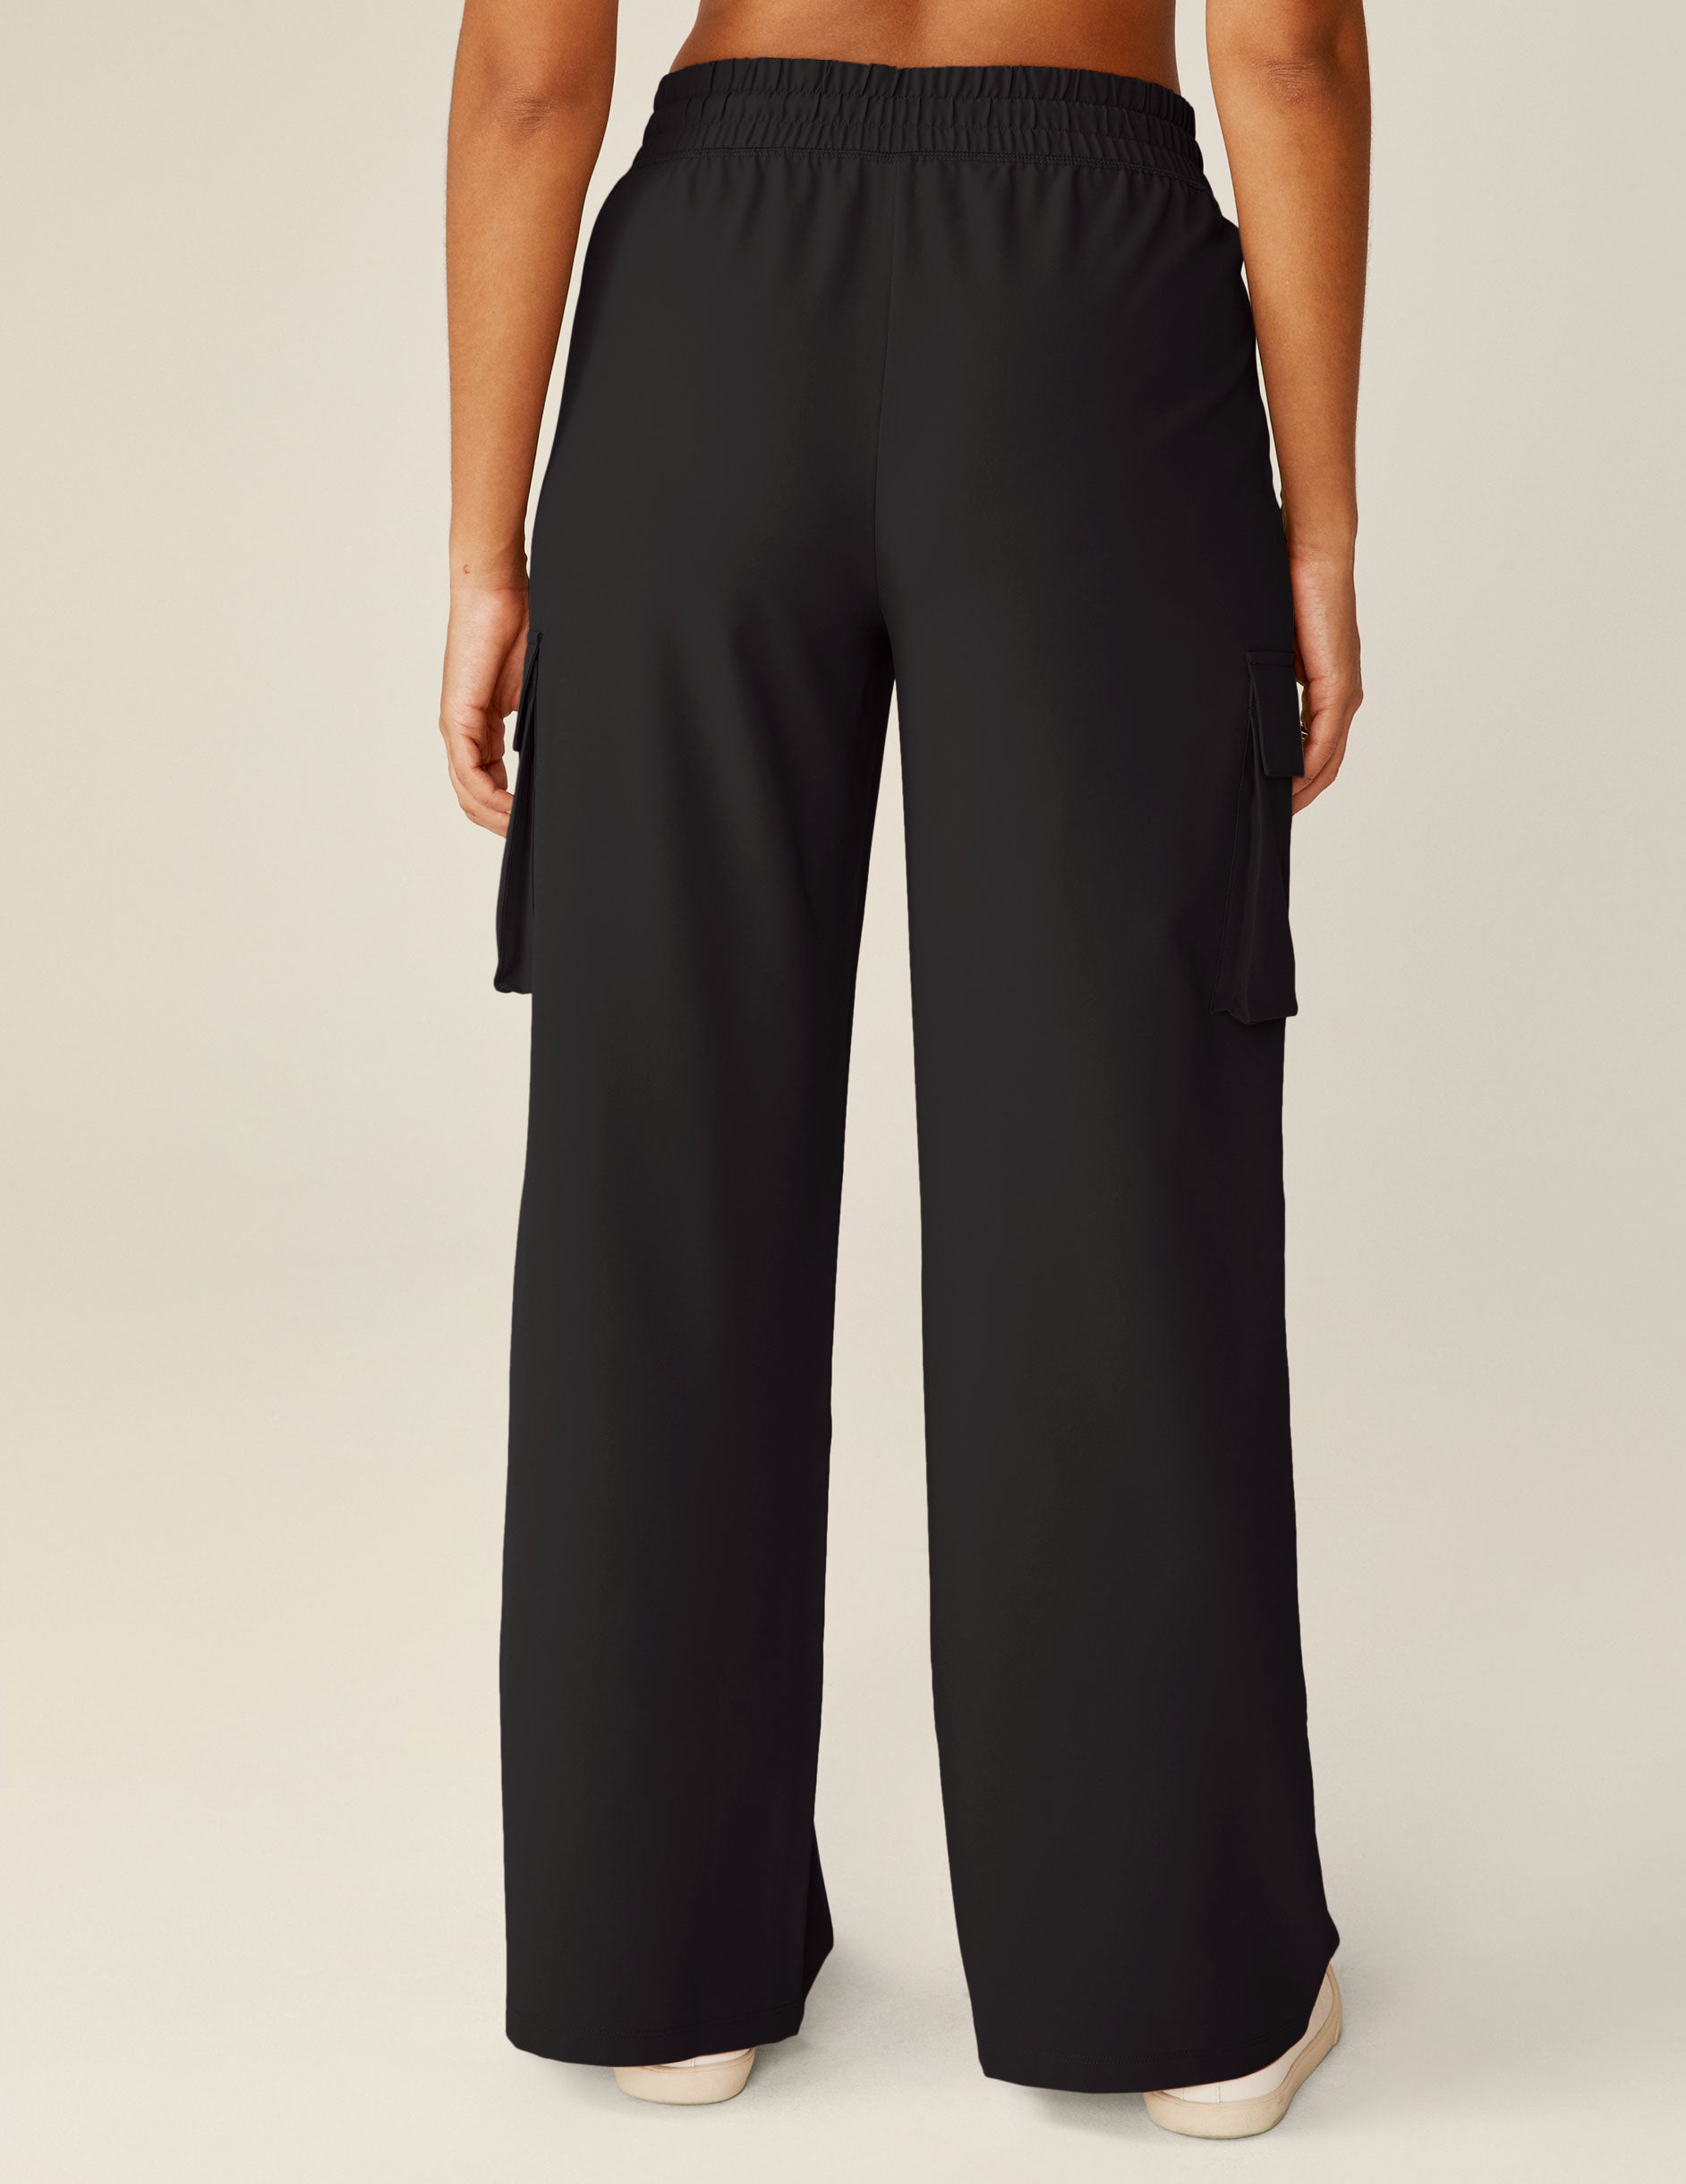 black cargo style pants with pockets. 